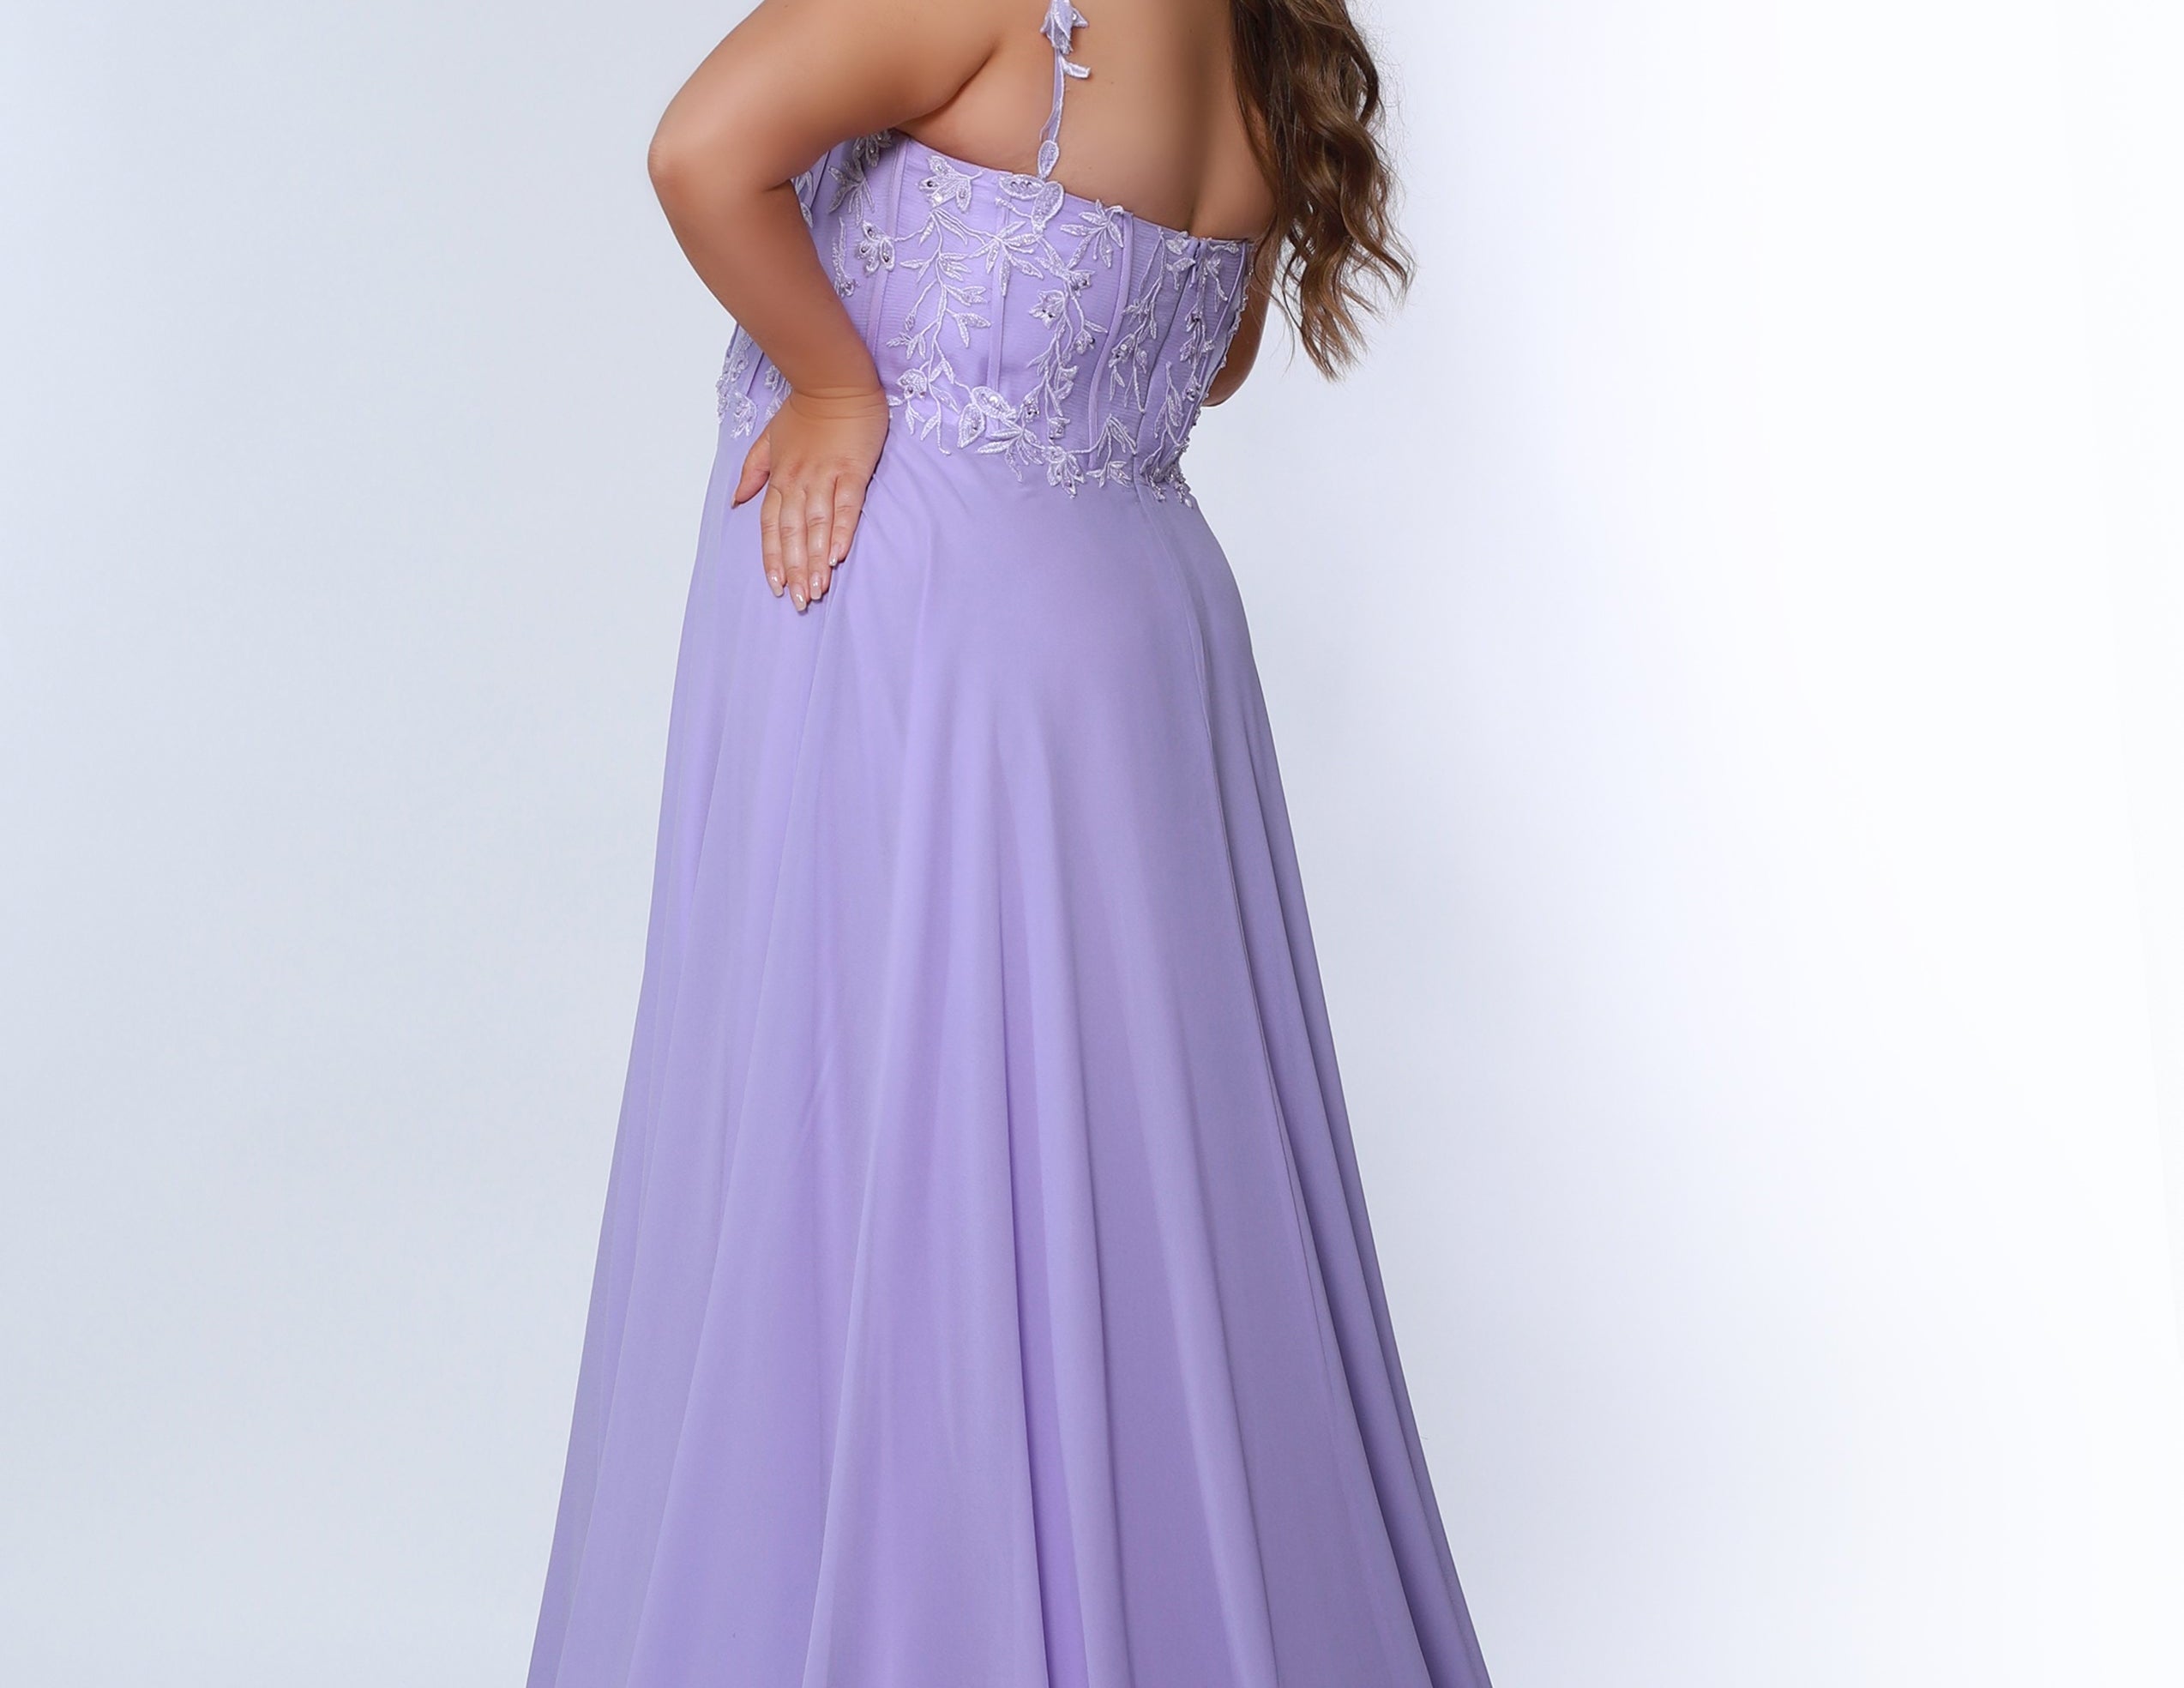 Sydney’s Closet SC7351 in light purple. Full A-line silhouette with a deep V-neckline and lace covered double straps. Chiffon, A-line skirt with a slit, and lace covered bodice with exposed boning. A natural waistline and partially lined bodice